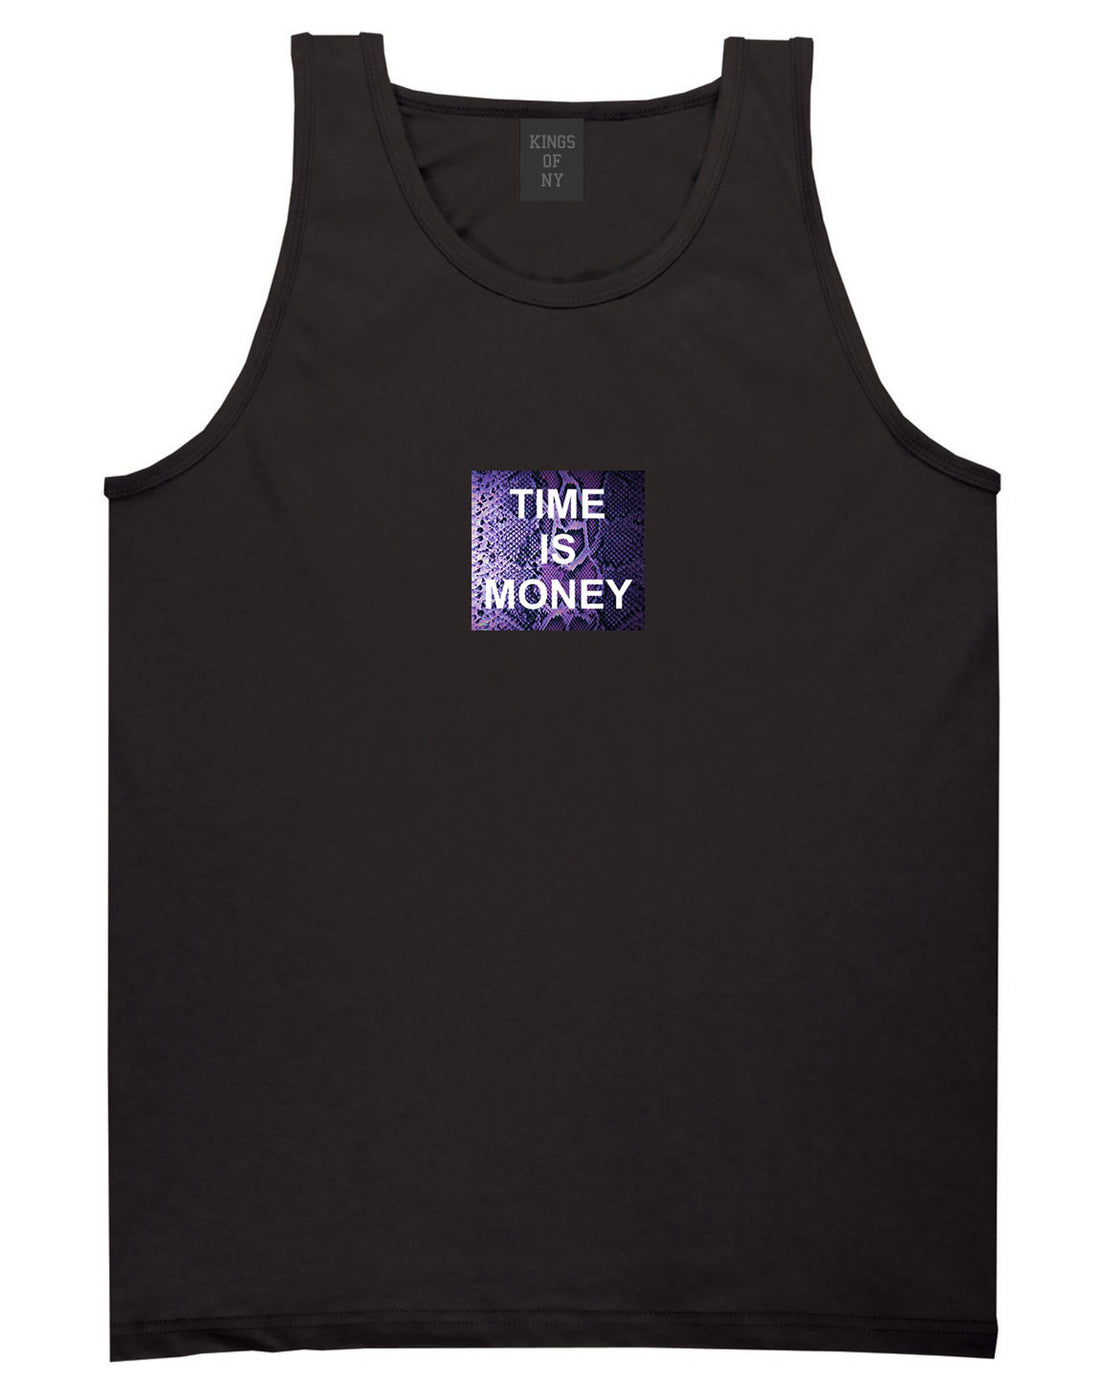 Time Is Money Snakesin Print Tank Top in Black By Kings Of NY